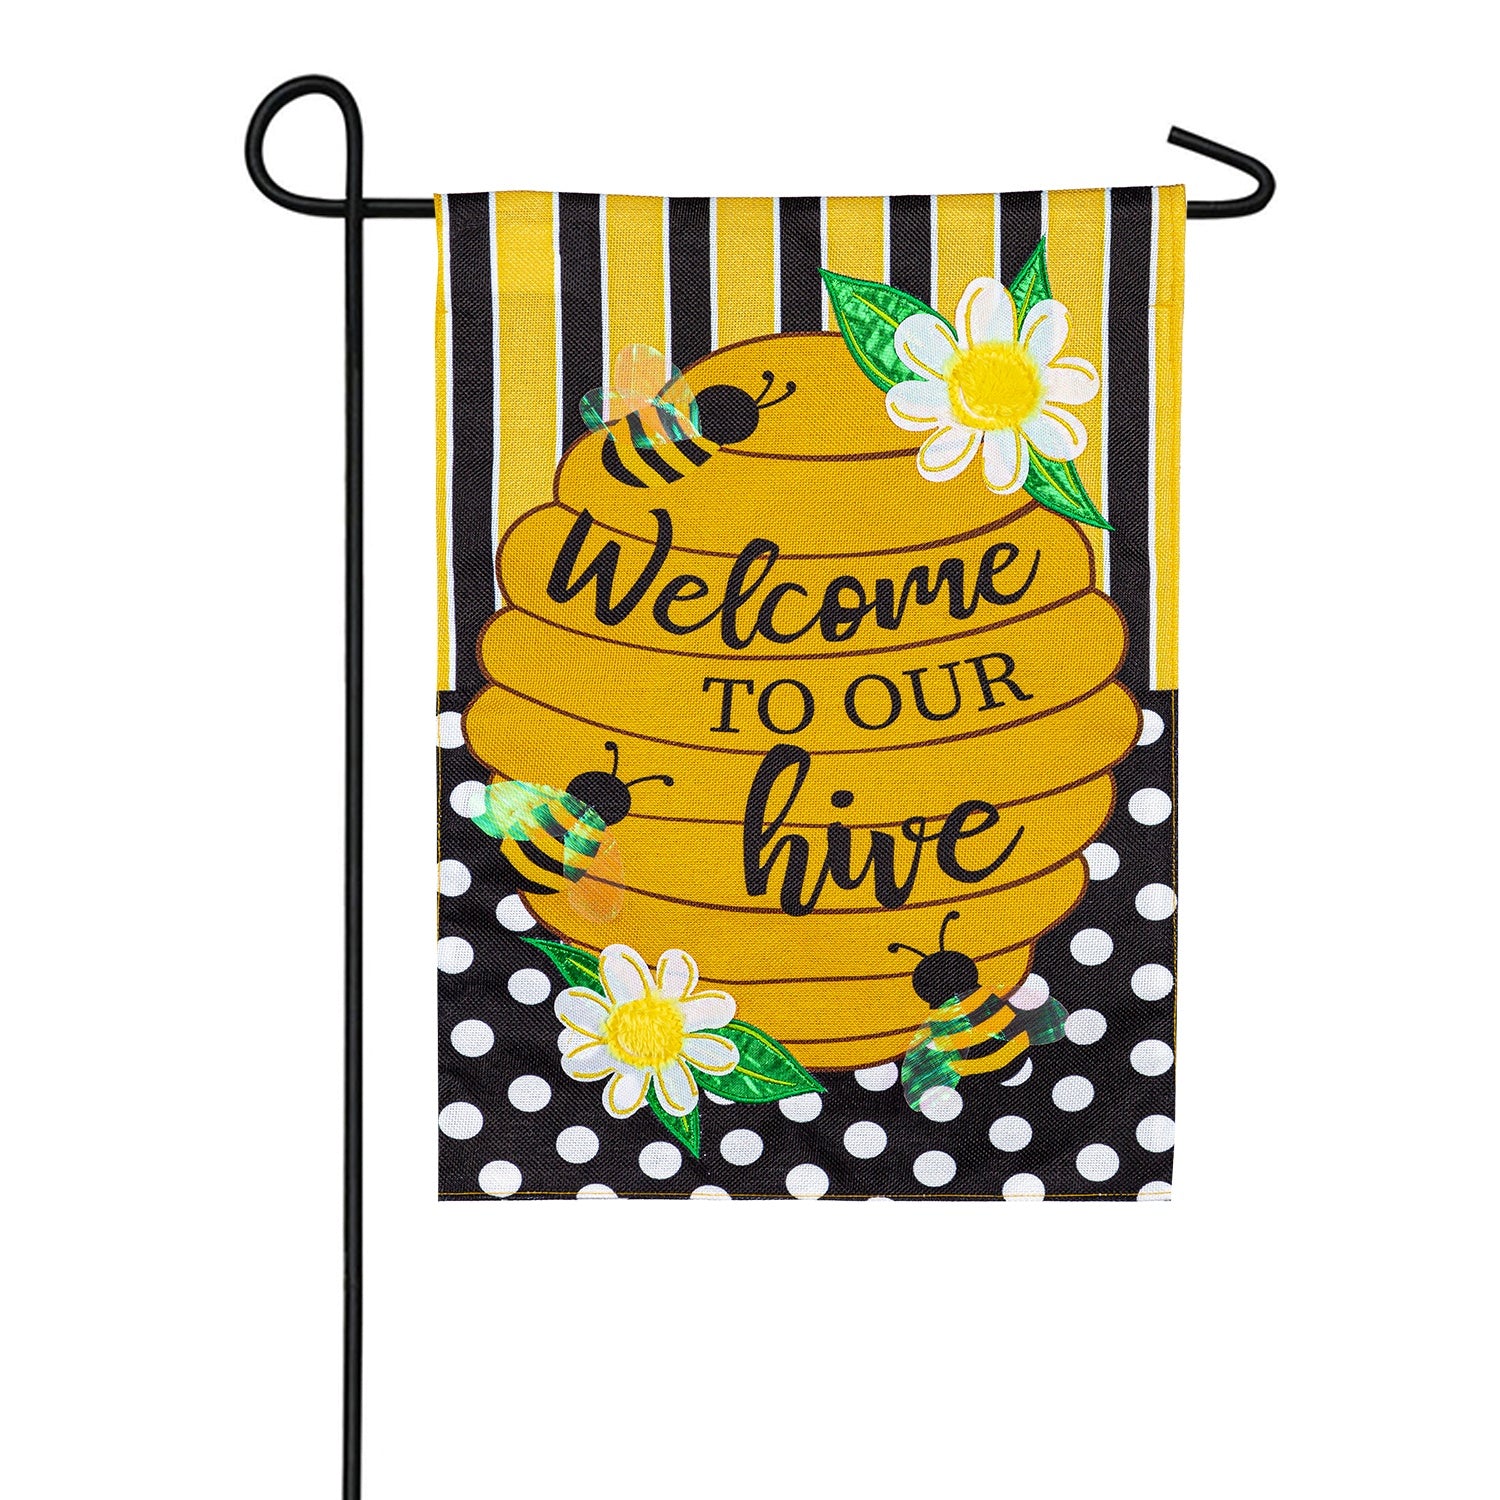 Evergreen Burlap Garden Flag - Welcome to Our Hive Stripes and Dots